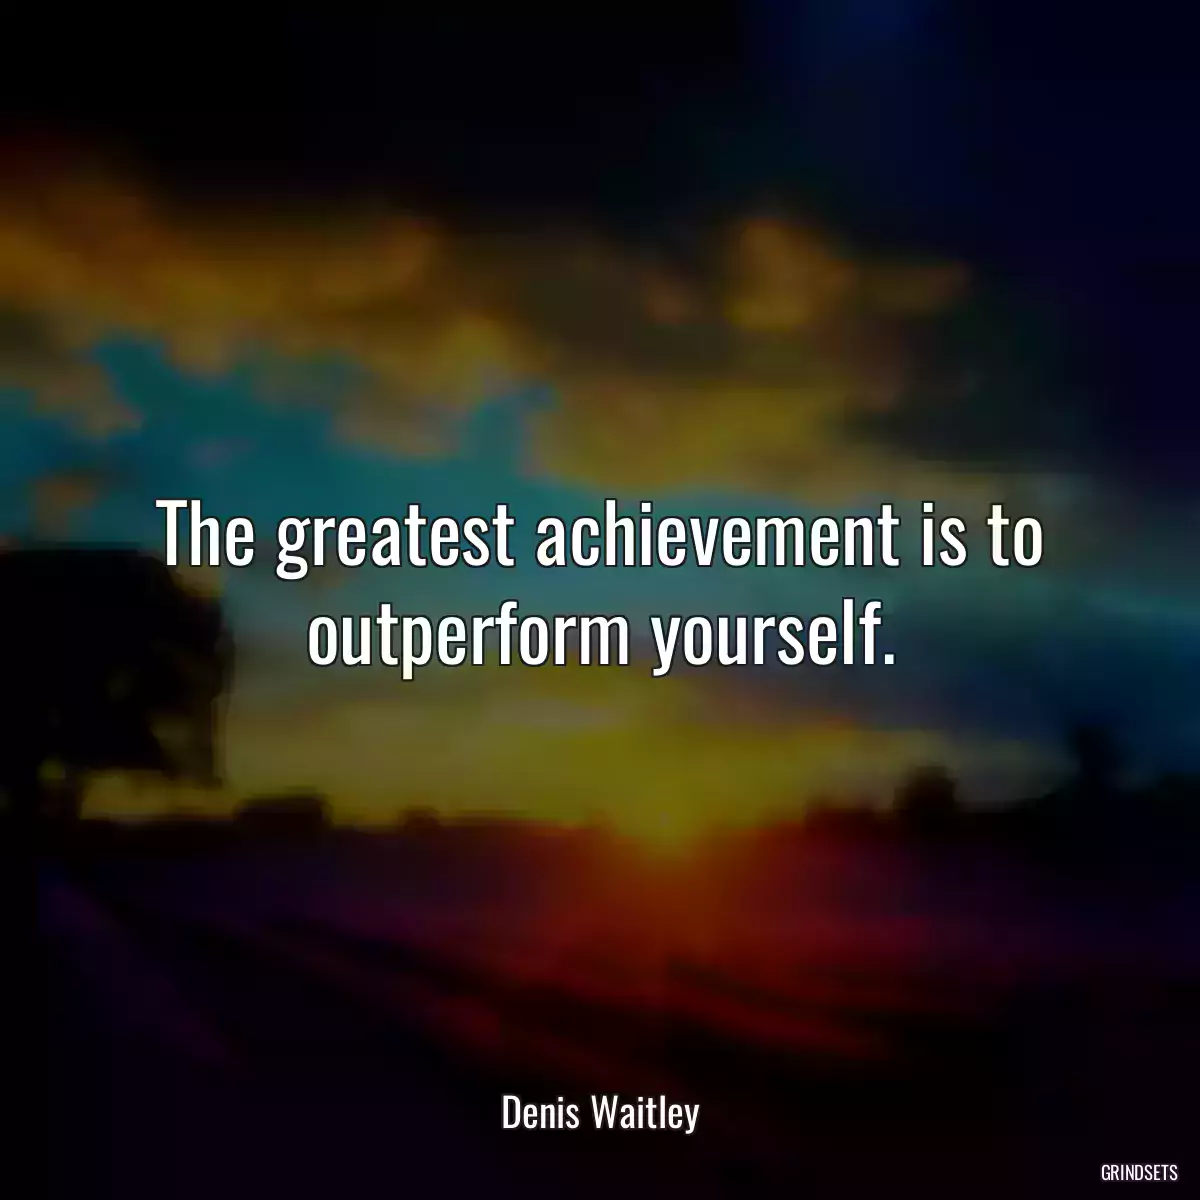 The greatest achievement is to outperform yourself.